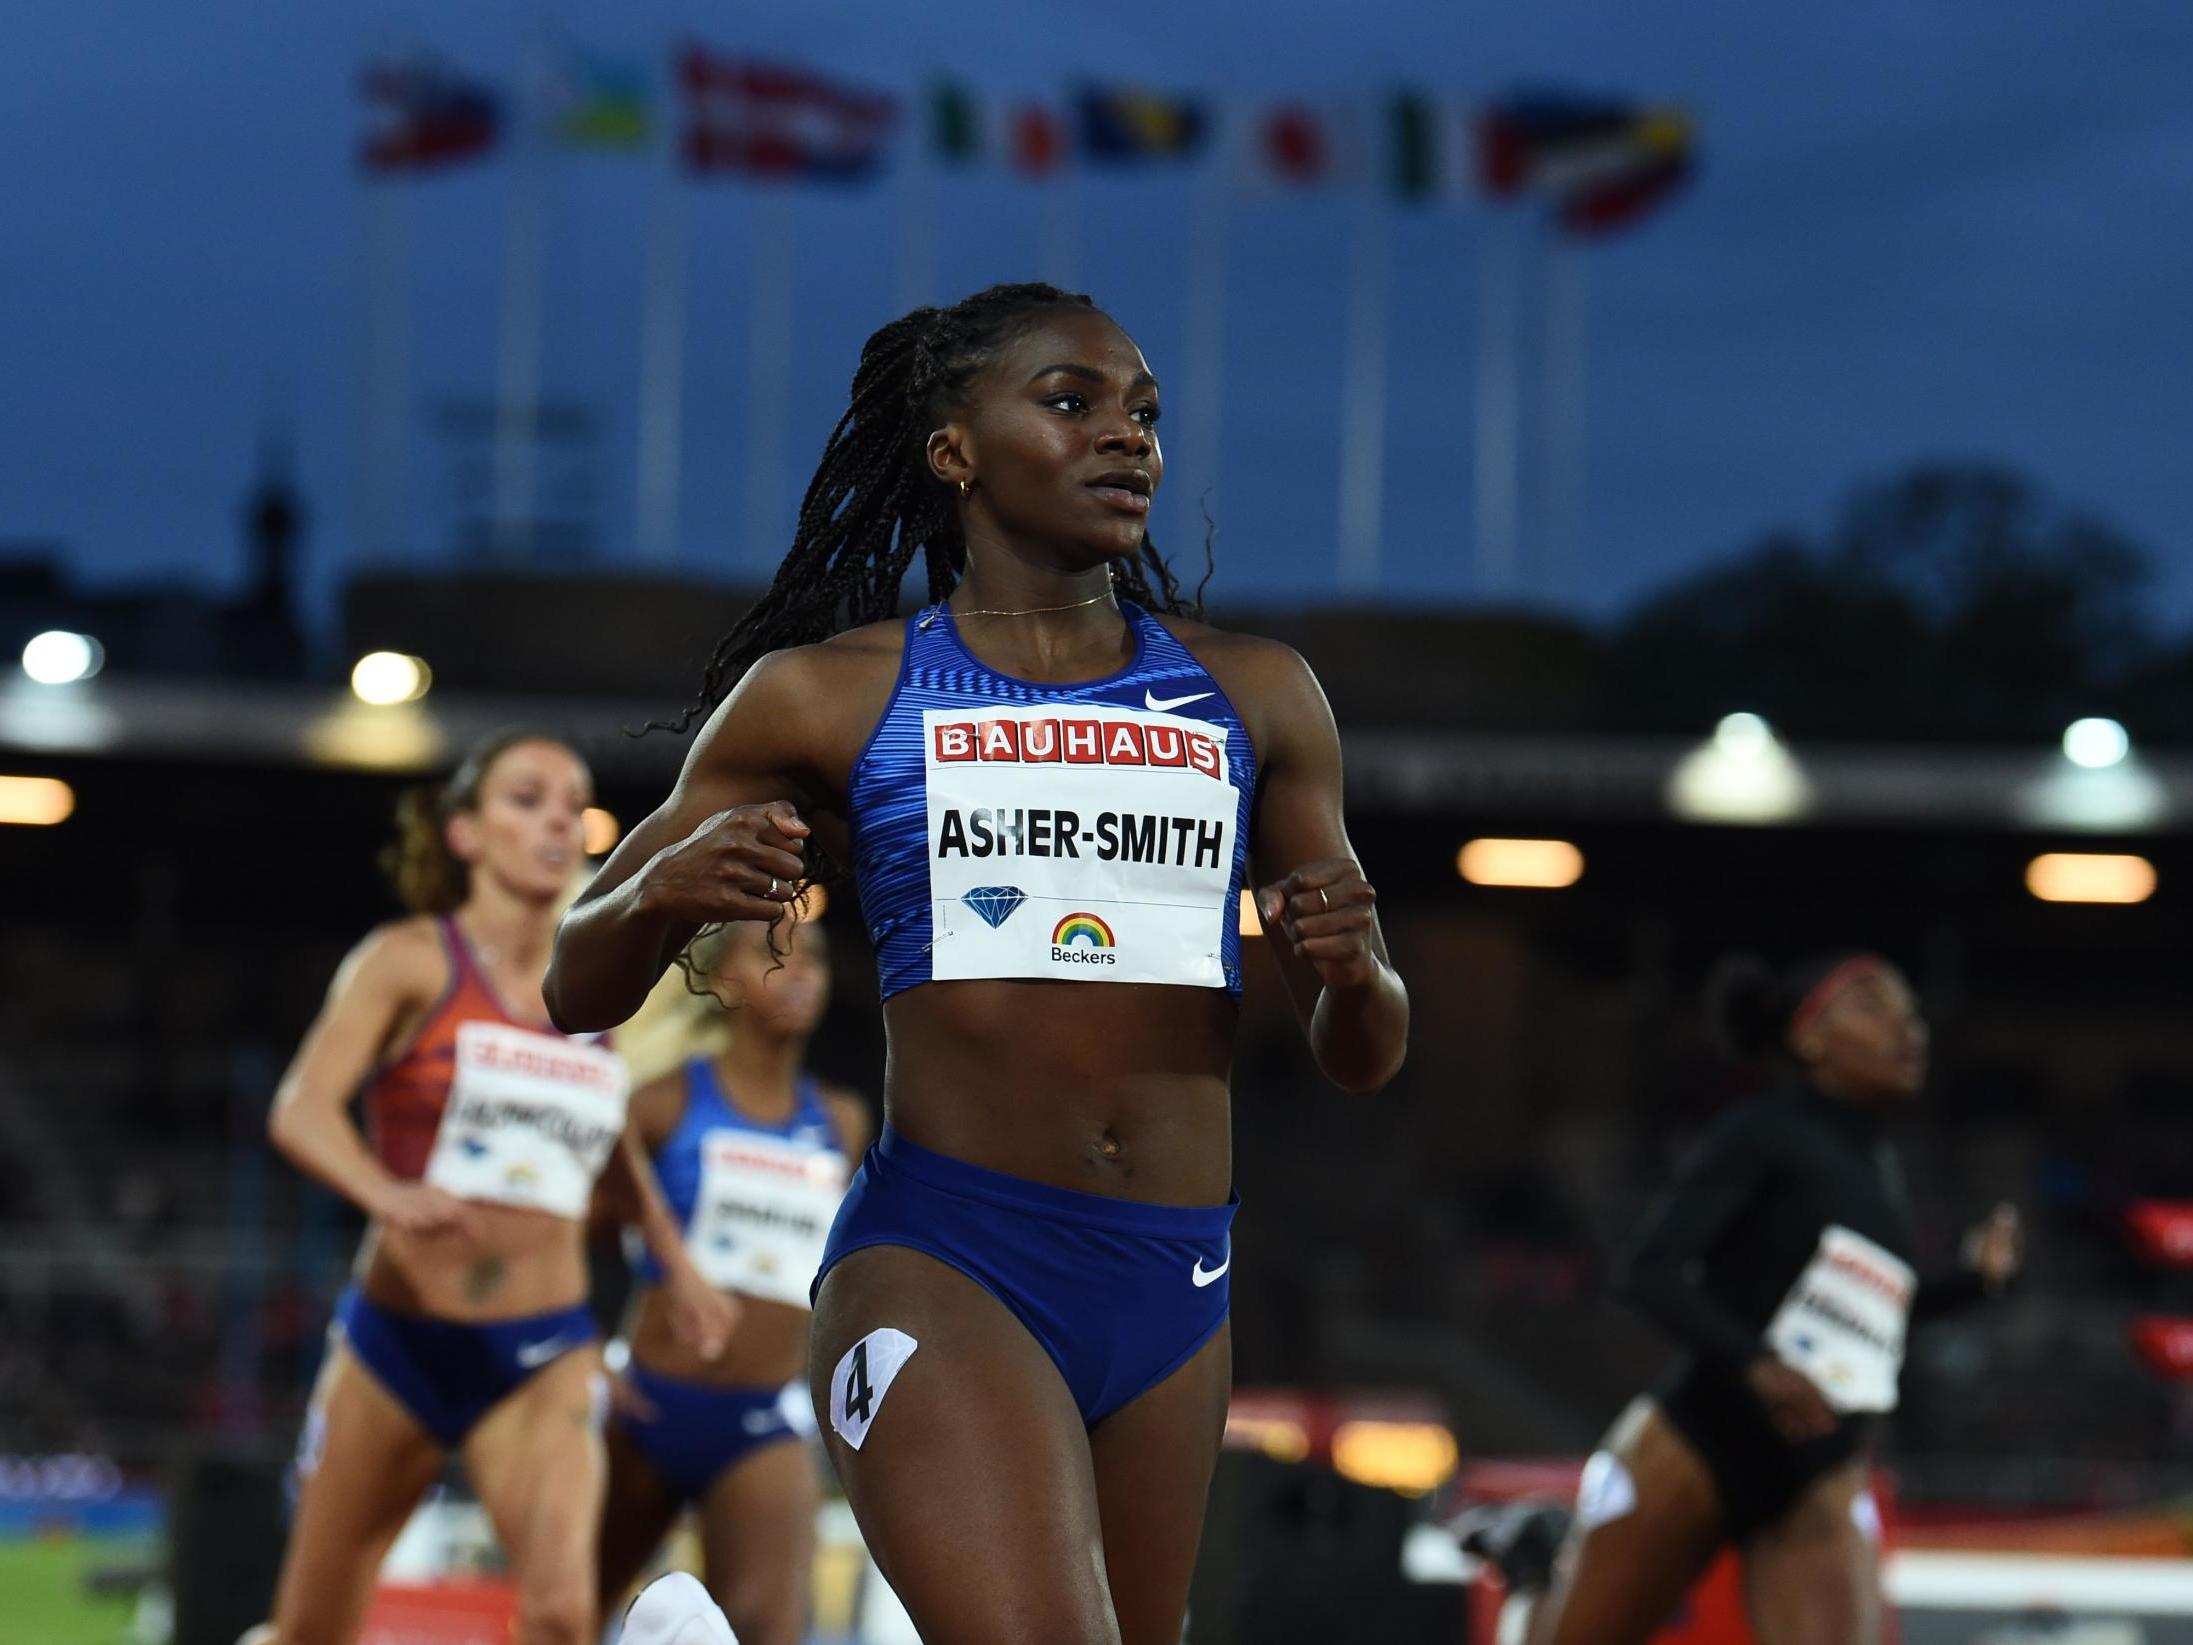 Dina Asher-Smith in action at the Diamond League earlier this year